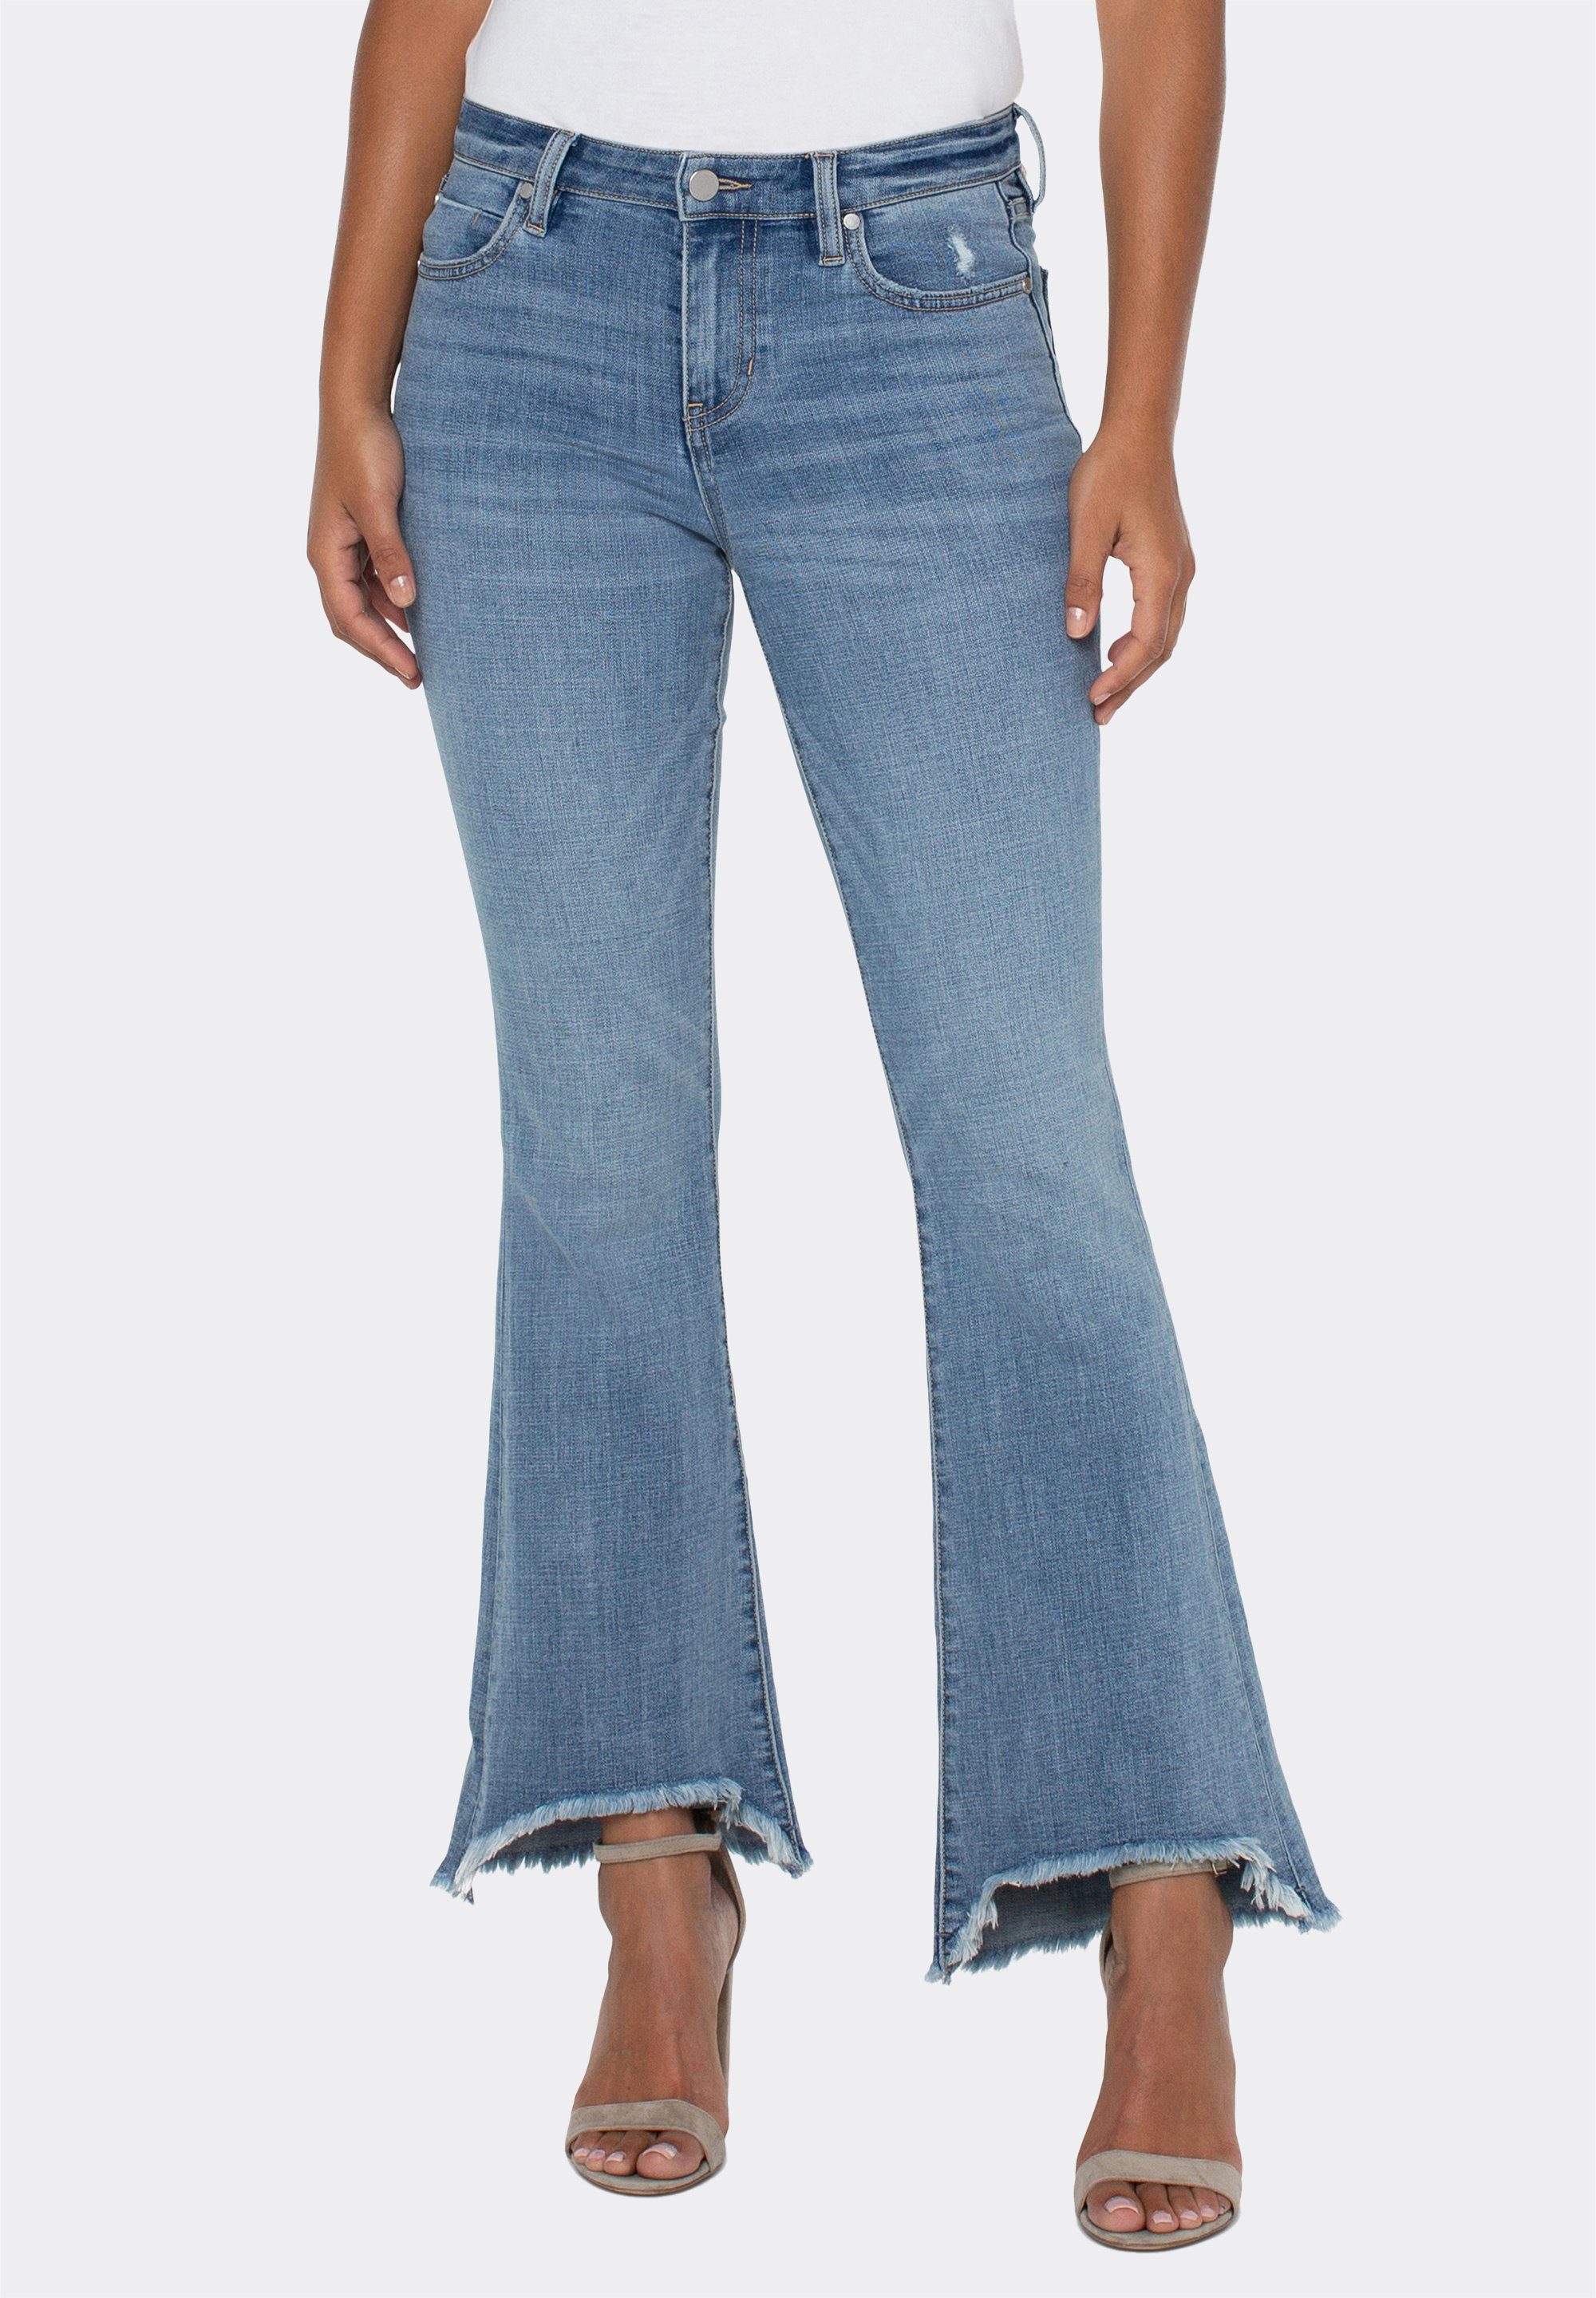 Flare Stretchy Hannah komfortabel Liverpool Bootcut-Jeans und